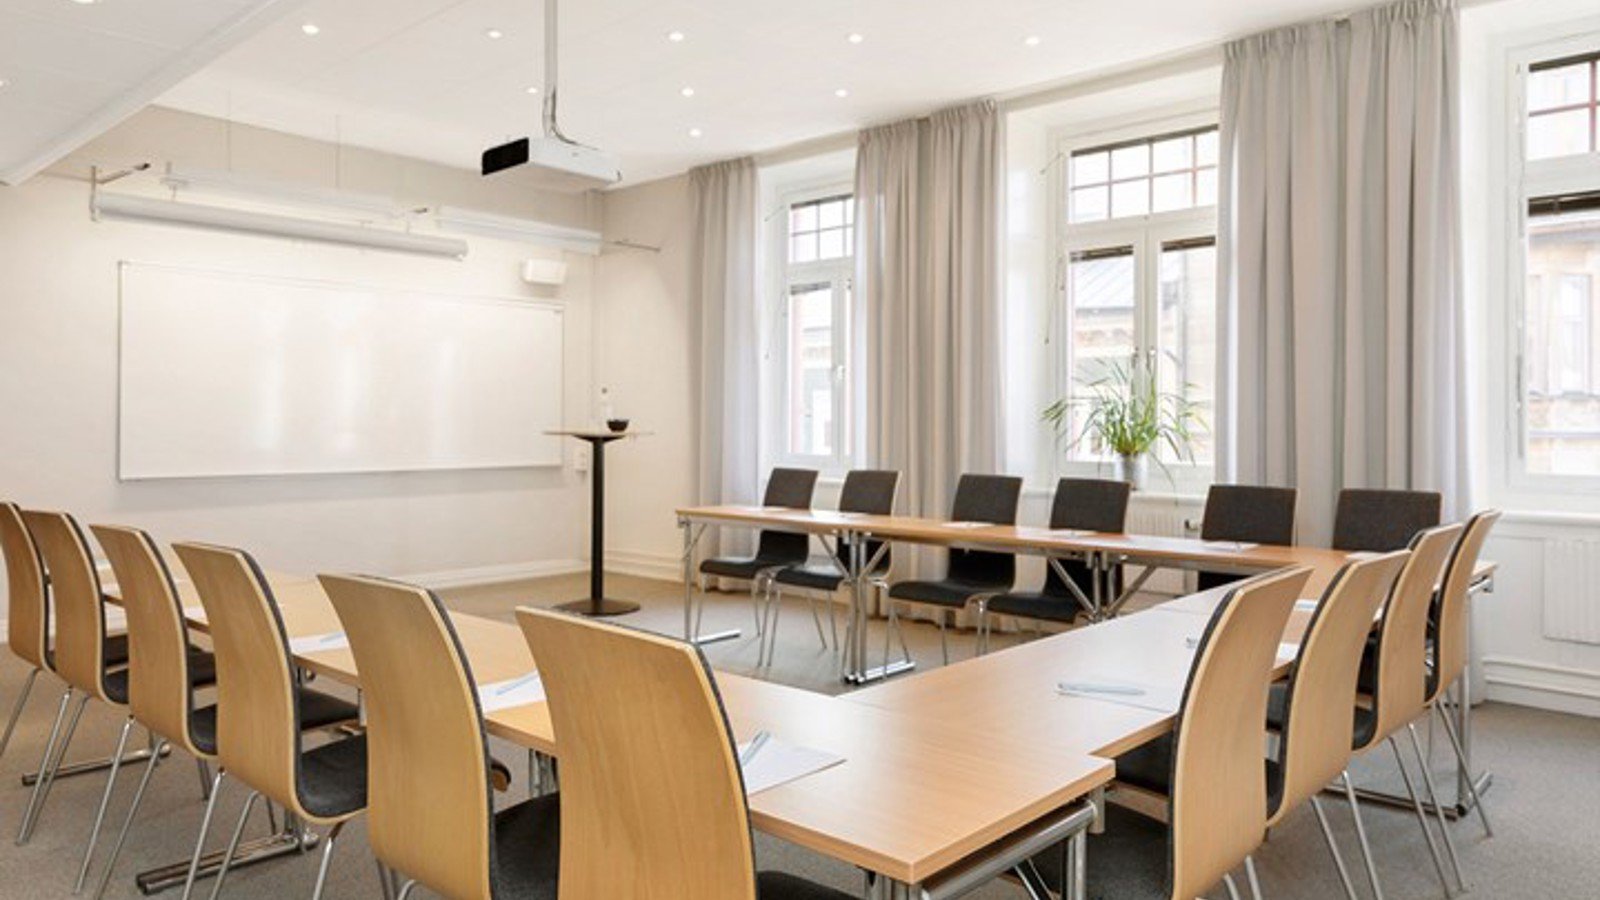 Conference room with u-shaped seating, white walls, large windows and wooden tables